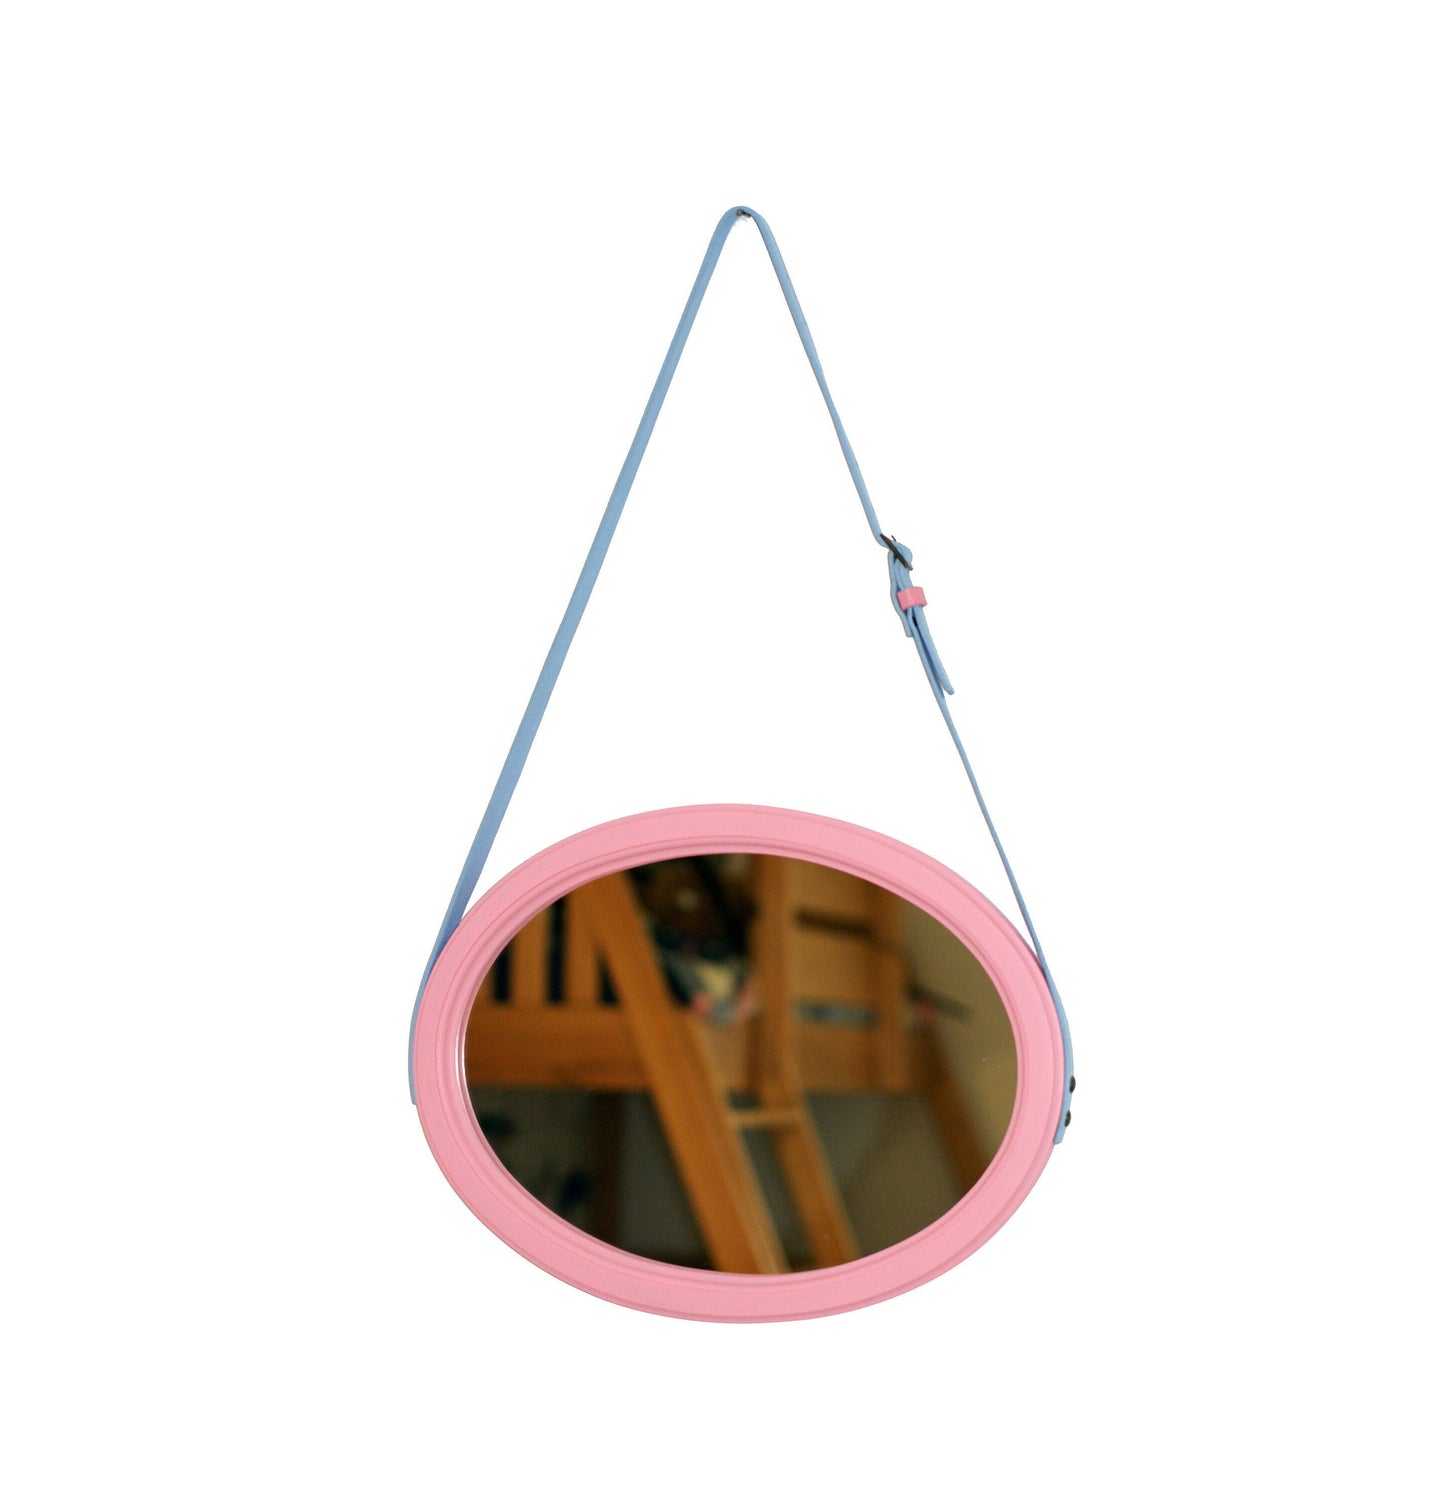 Oval mirror for kids room, Pink frame wall mirror, Girls room hanging mirror with leather strap, Mirror for girls, Pink princess mirror